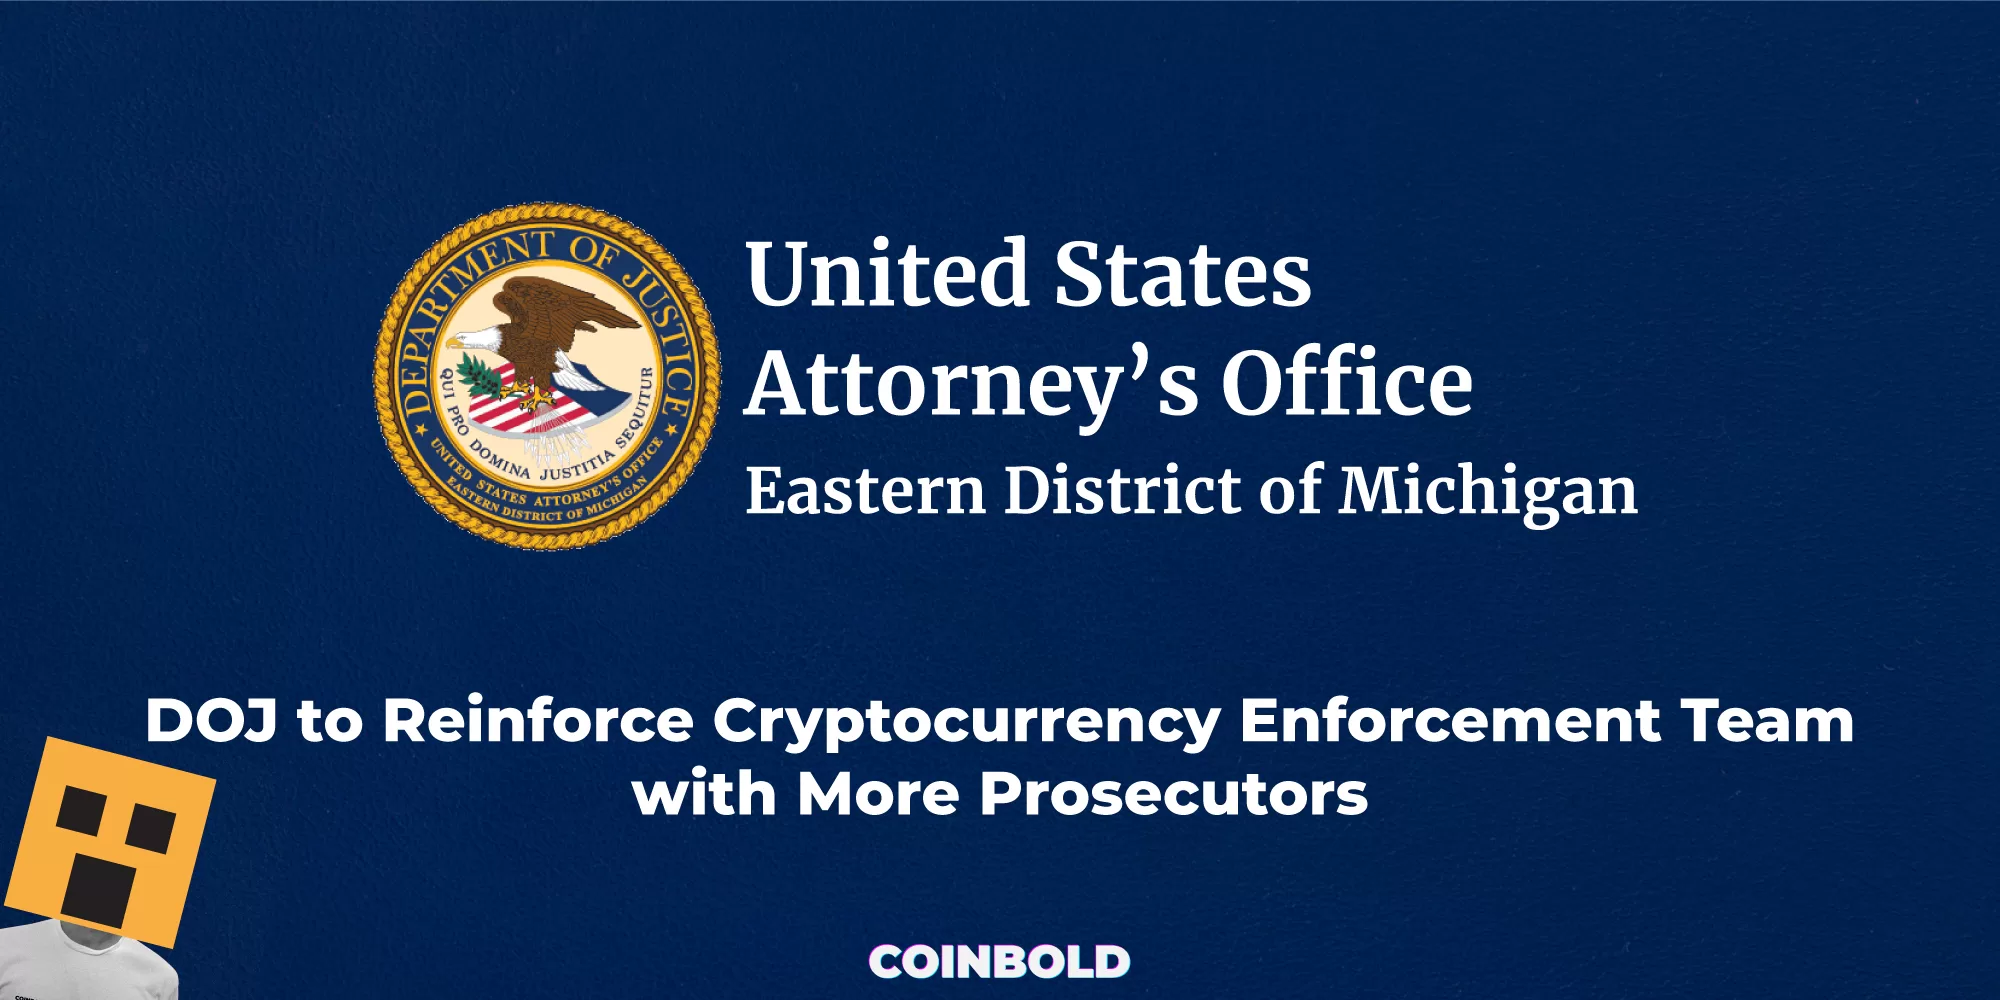 DOJ to Reinforce Cryptocurrency Enforcement Team with More Prosecutors